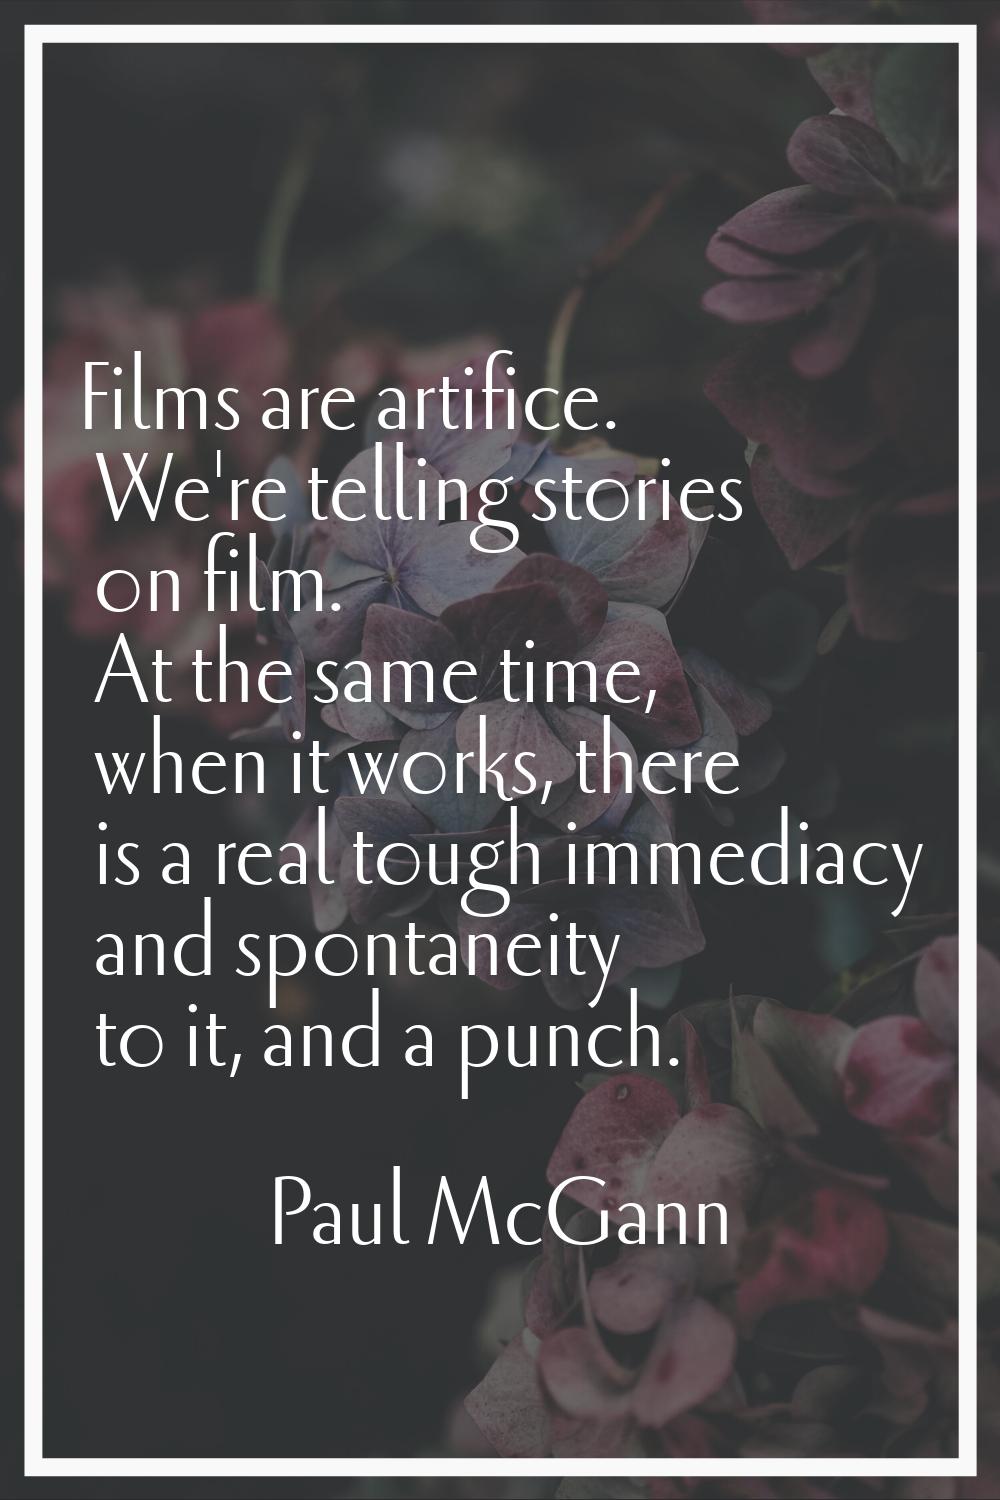 Films are artifice. We're telling stories on film. At the same time, when it works, there is a real